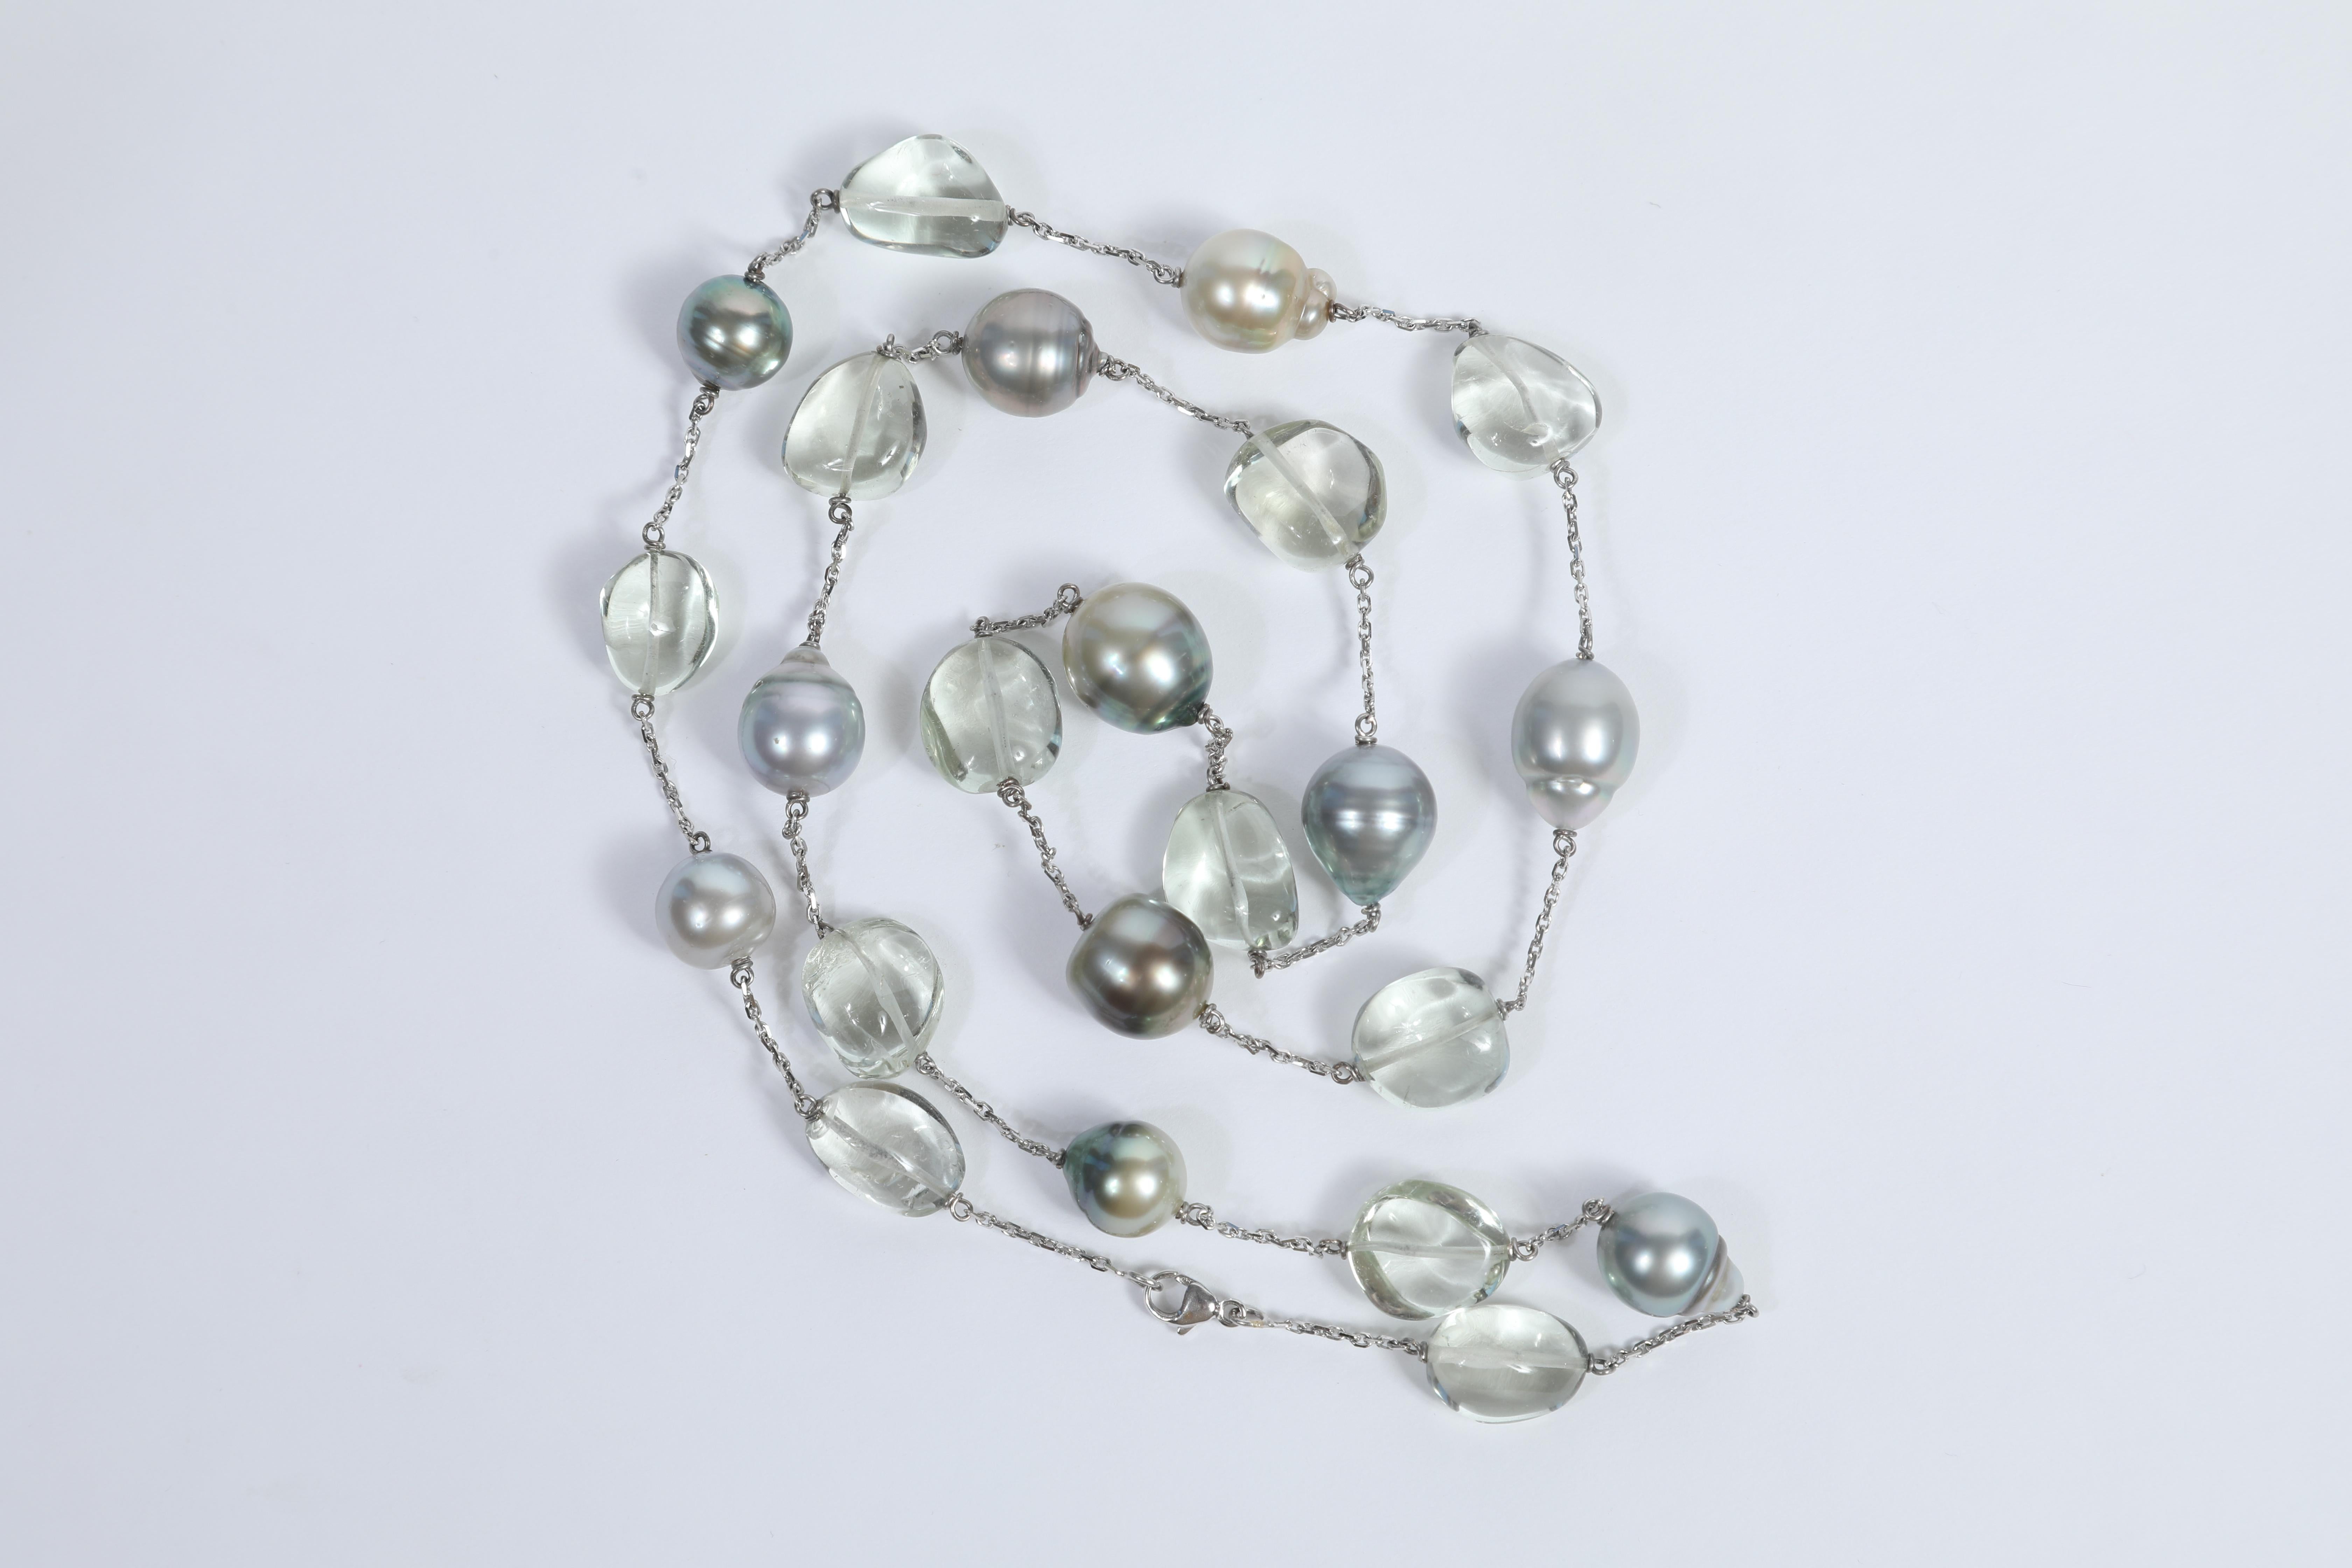 Women's Baroque Tahiti Pearls, Green Quartz, Long Necklace by Marion Jeantet